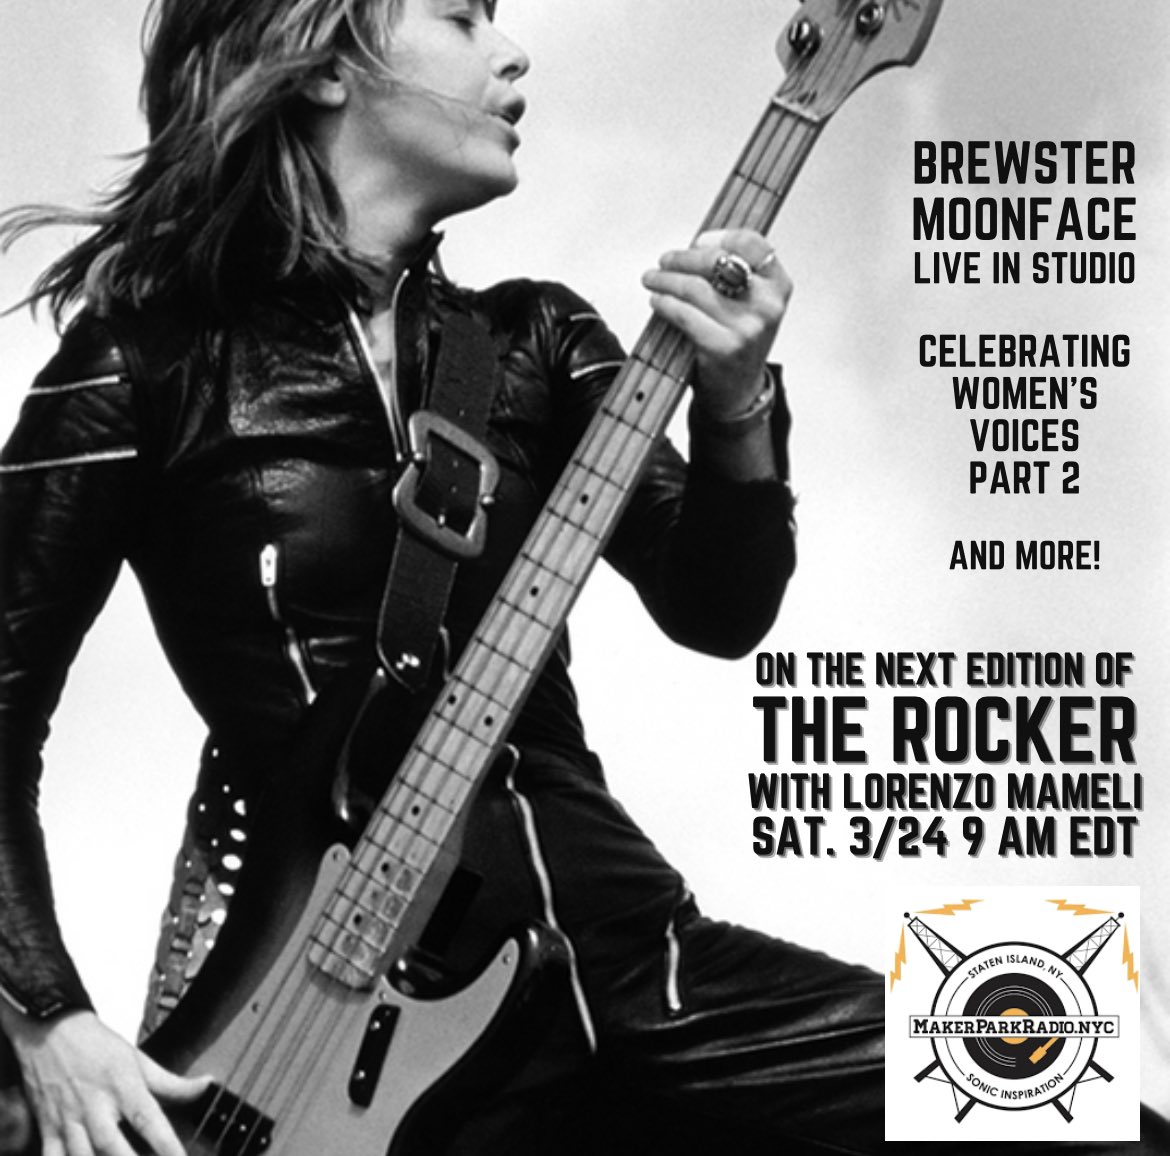 You are cordially invited to rock with us live on the web at MakerPark Radio - makerparkradio.nyc, our free app and on your smart speaker. #makerparkradio #brewstermoonface #therockernyc #streamingradio #bluesmusic #femalefrontedrock